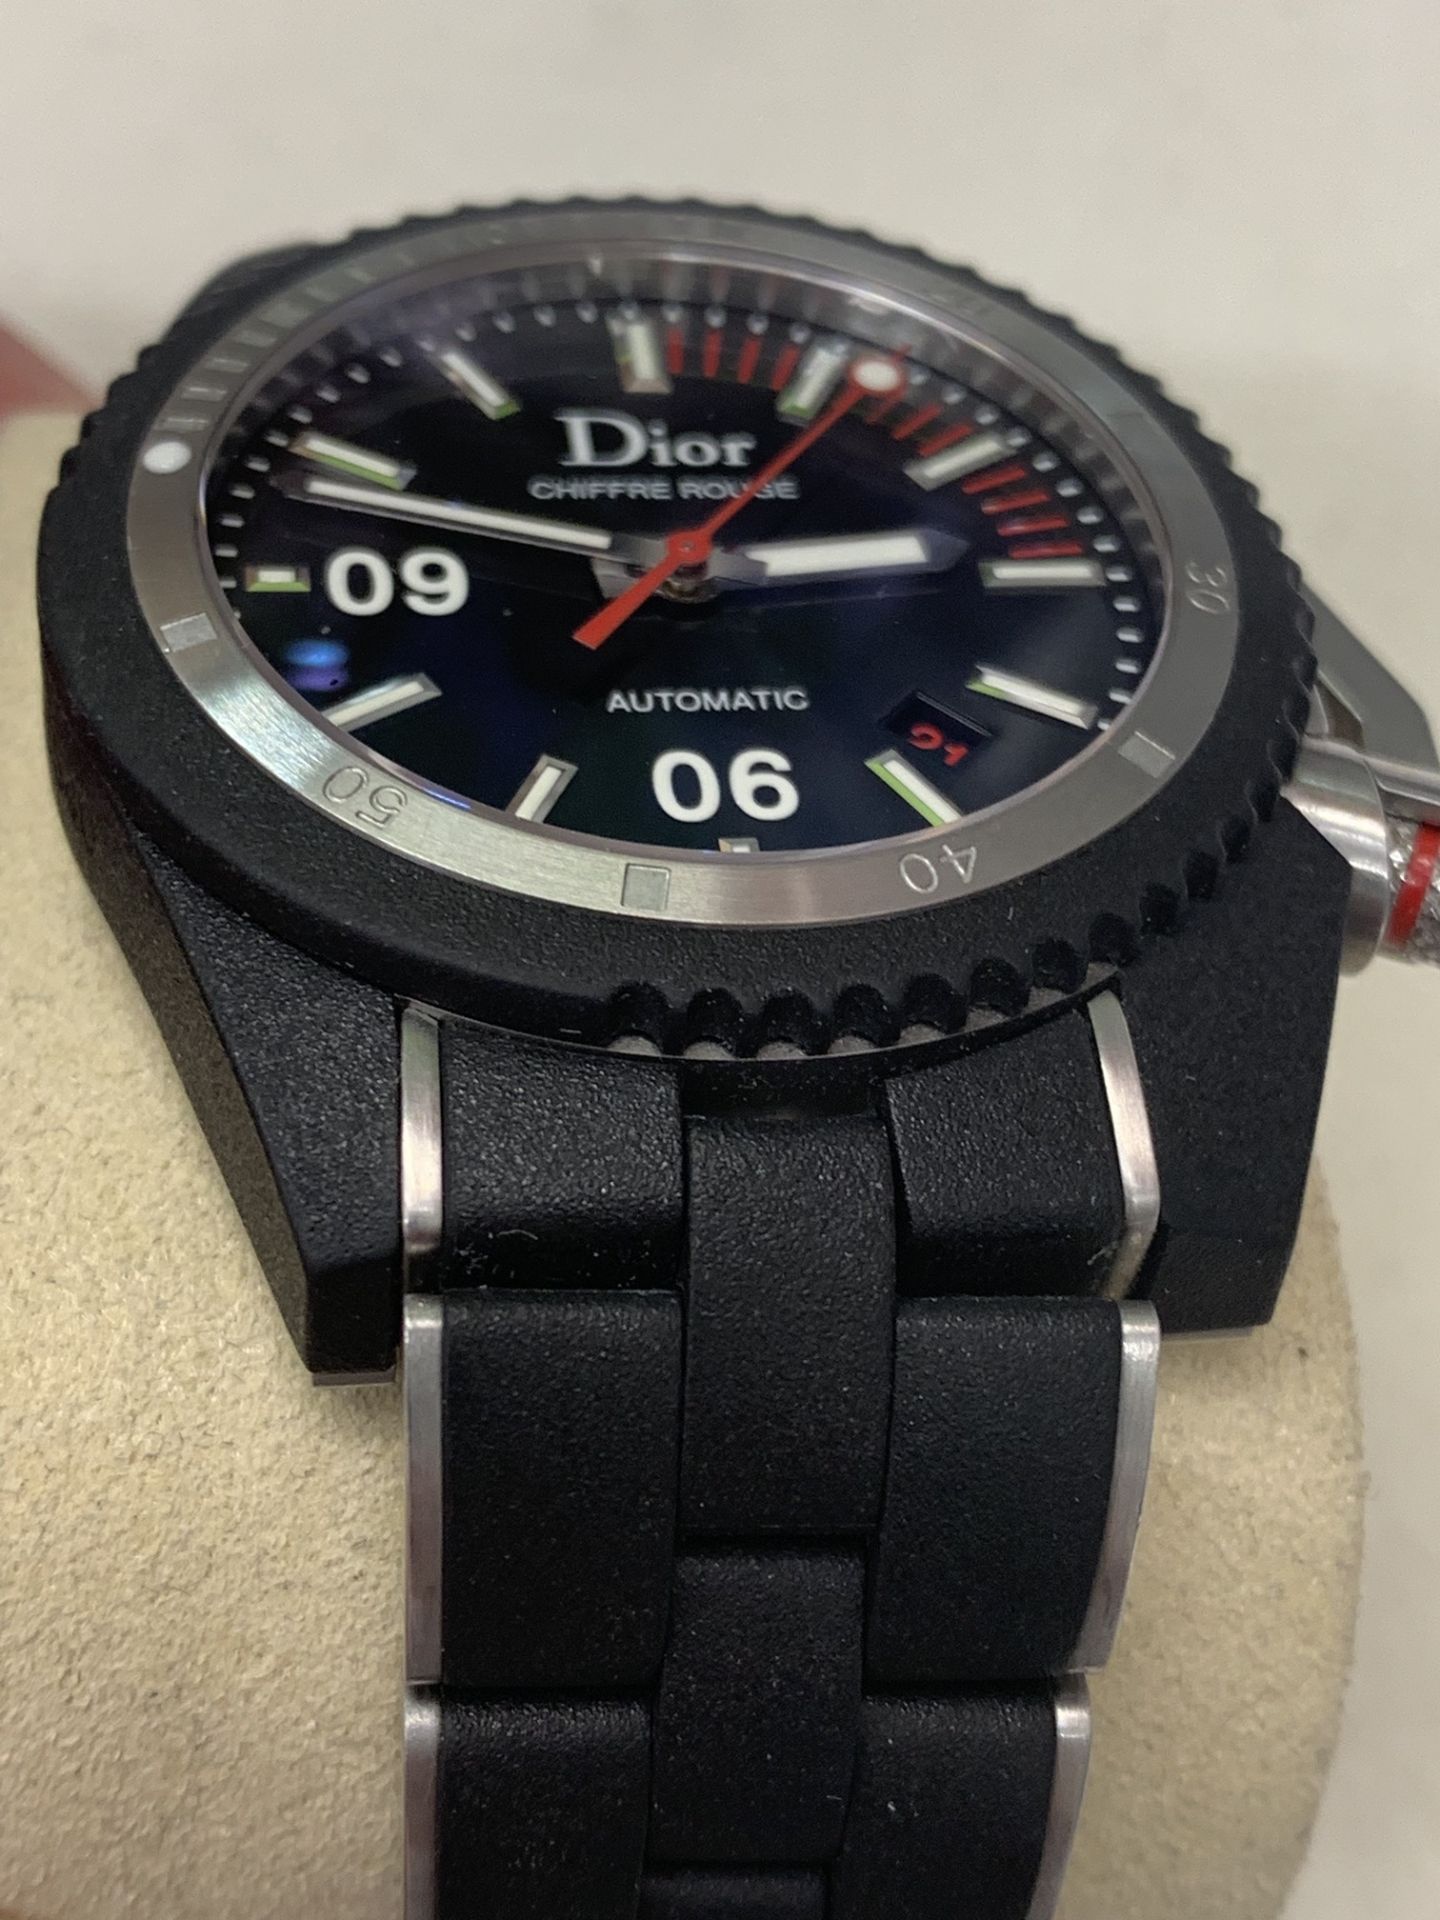 DIOR CHIFFRE ROUGE DIVING WATCH 42mm - Image 3 of 8